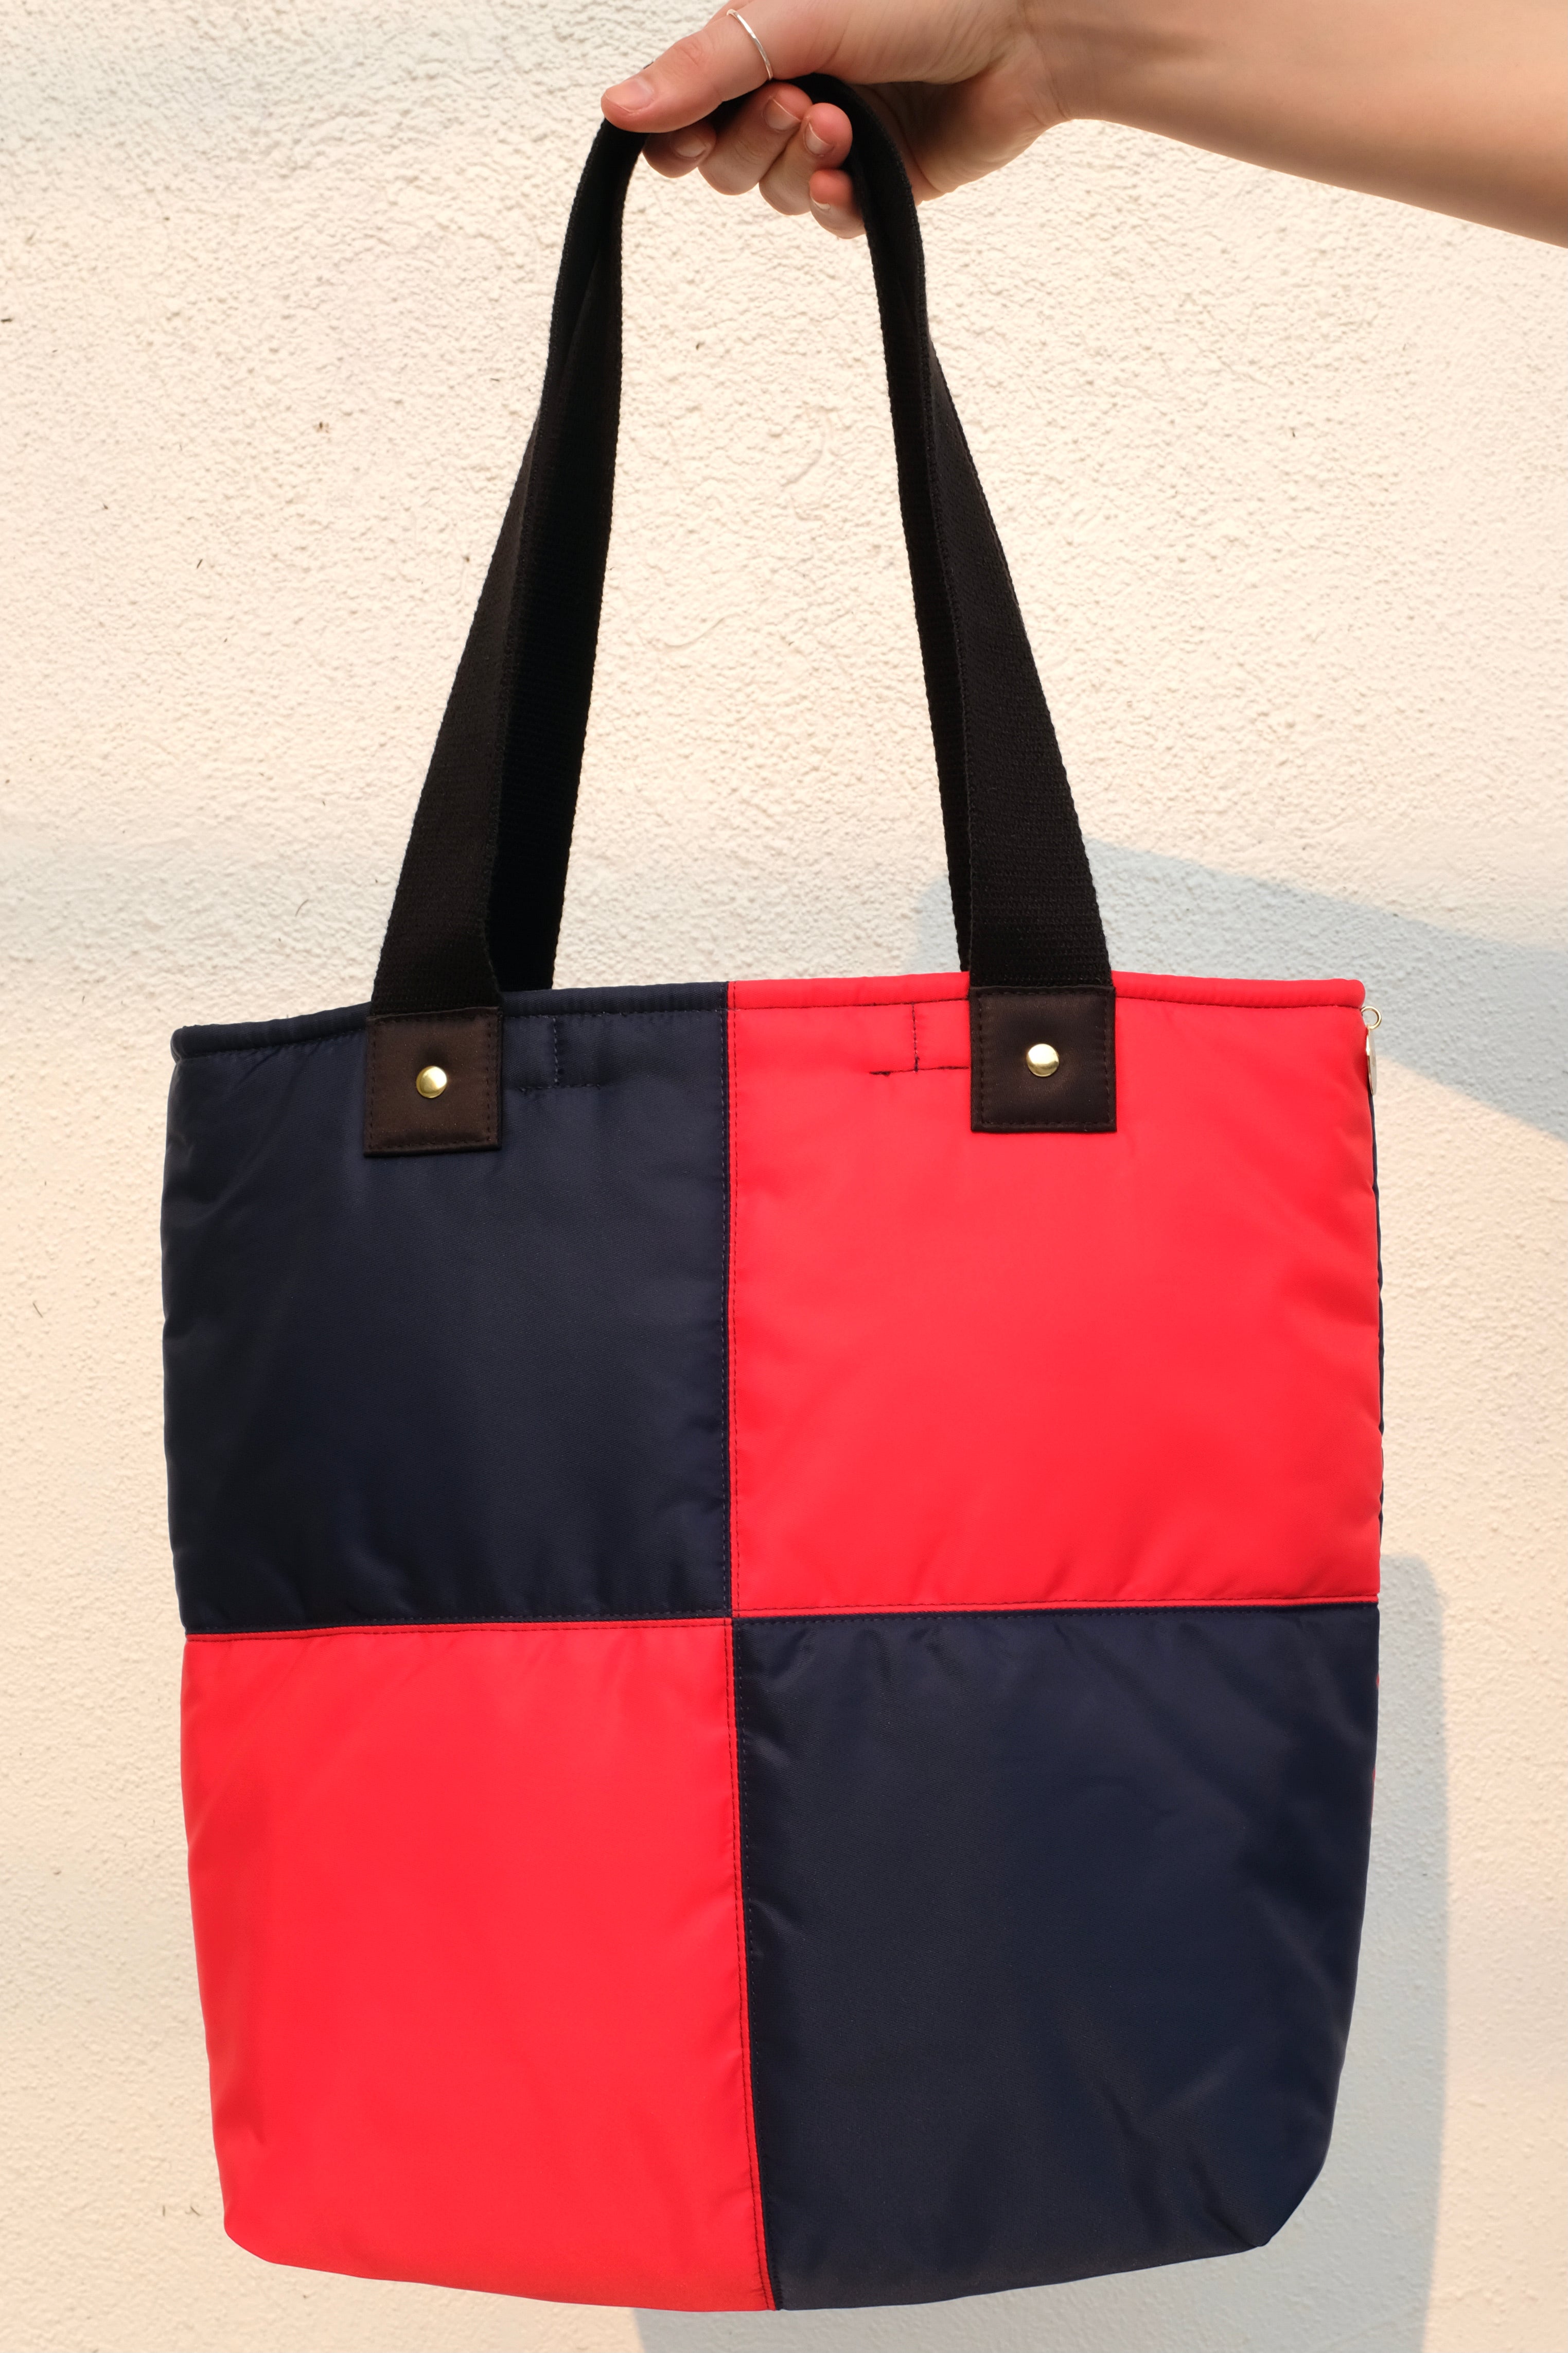 Block Shop Annie Tote / Navy + Red Quilted Puffer